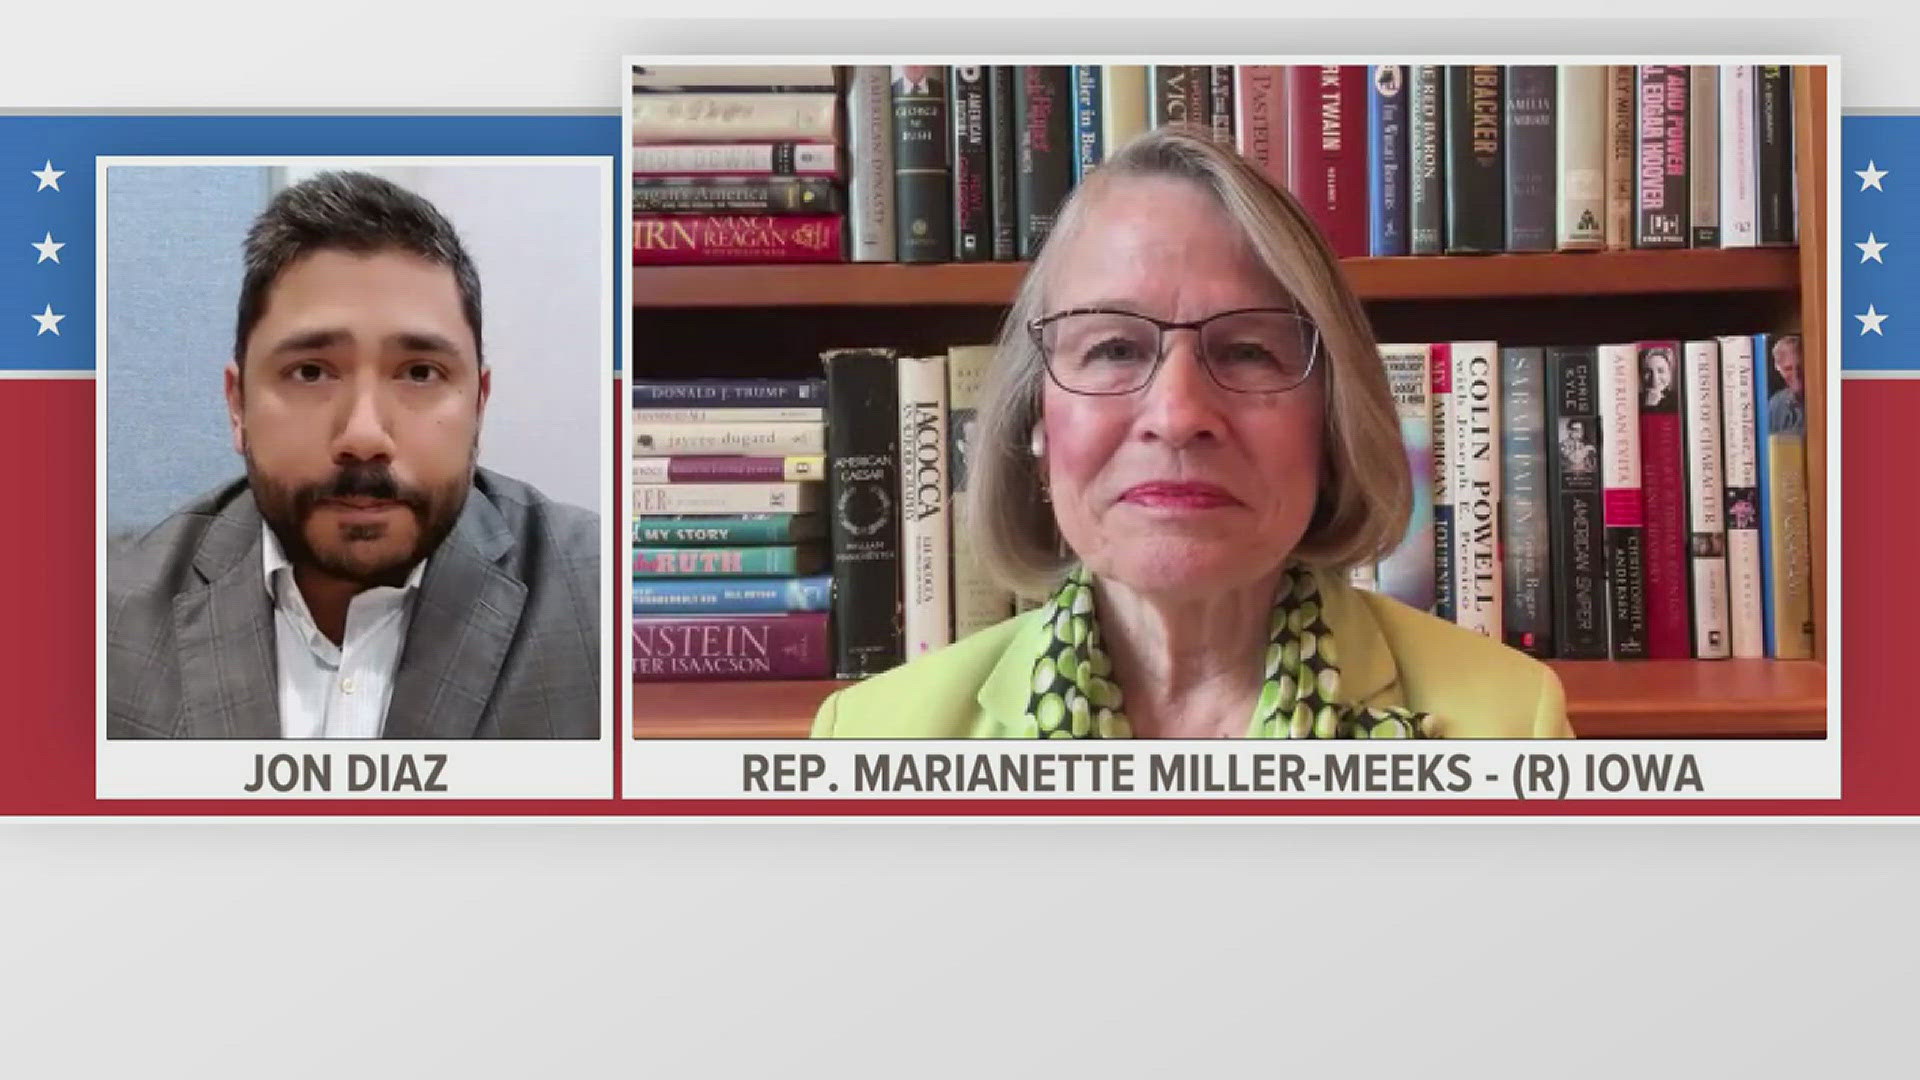 News 8's Jon Diaz sits down to chat with Congresswoman Marianette Miller-Meeks to learn what her policy would be focused on if re-elected.